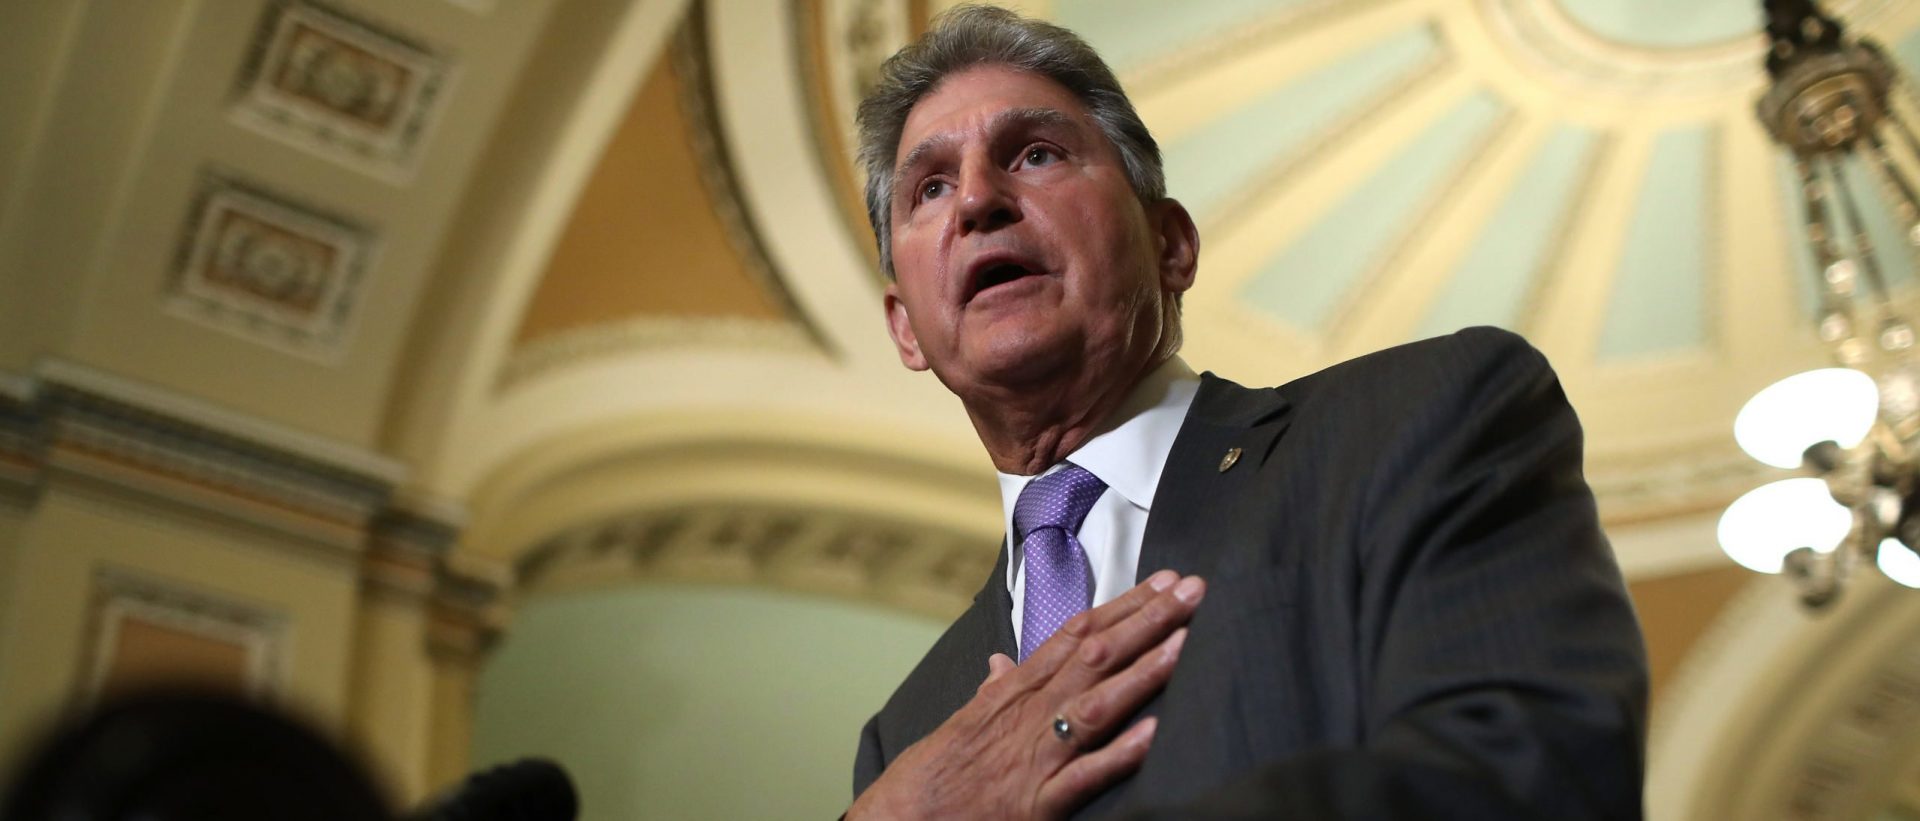 ‘The Definition Of Fiscal Insanity’: Manchin Slams Reconciliation Trace Trace, Calls for Hyde Amendment Reinstatement